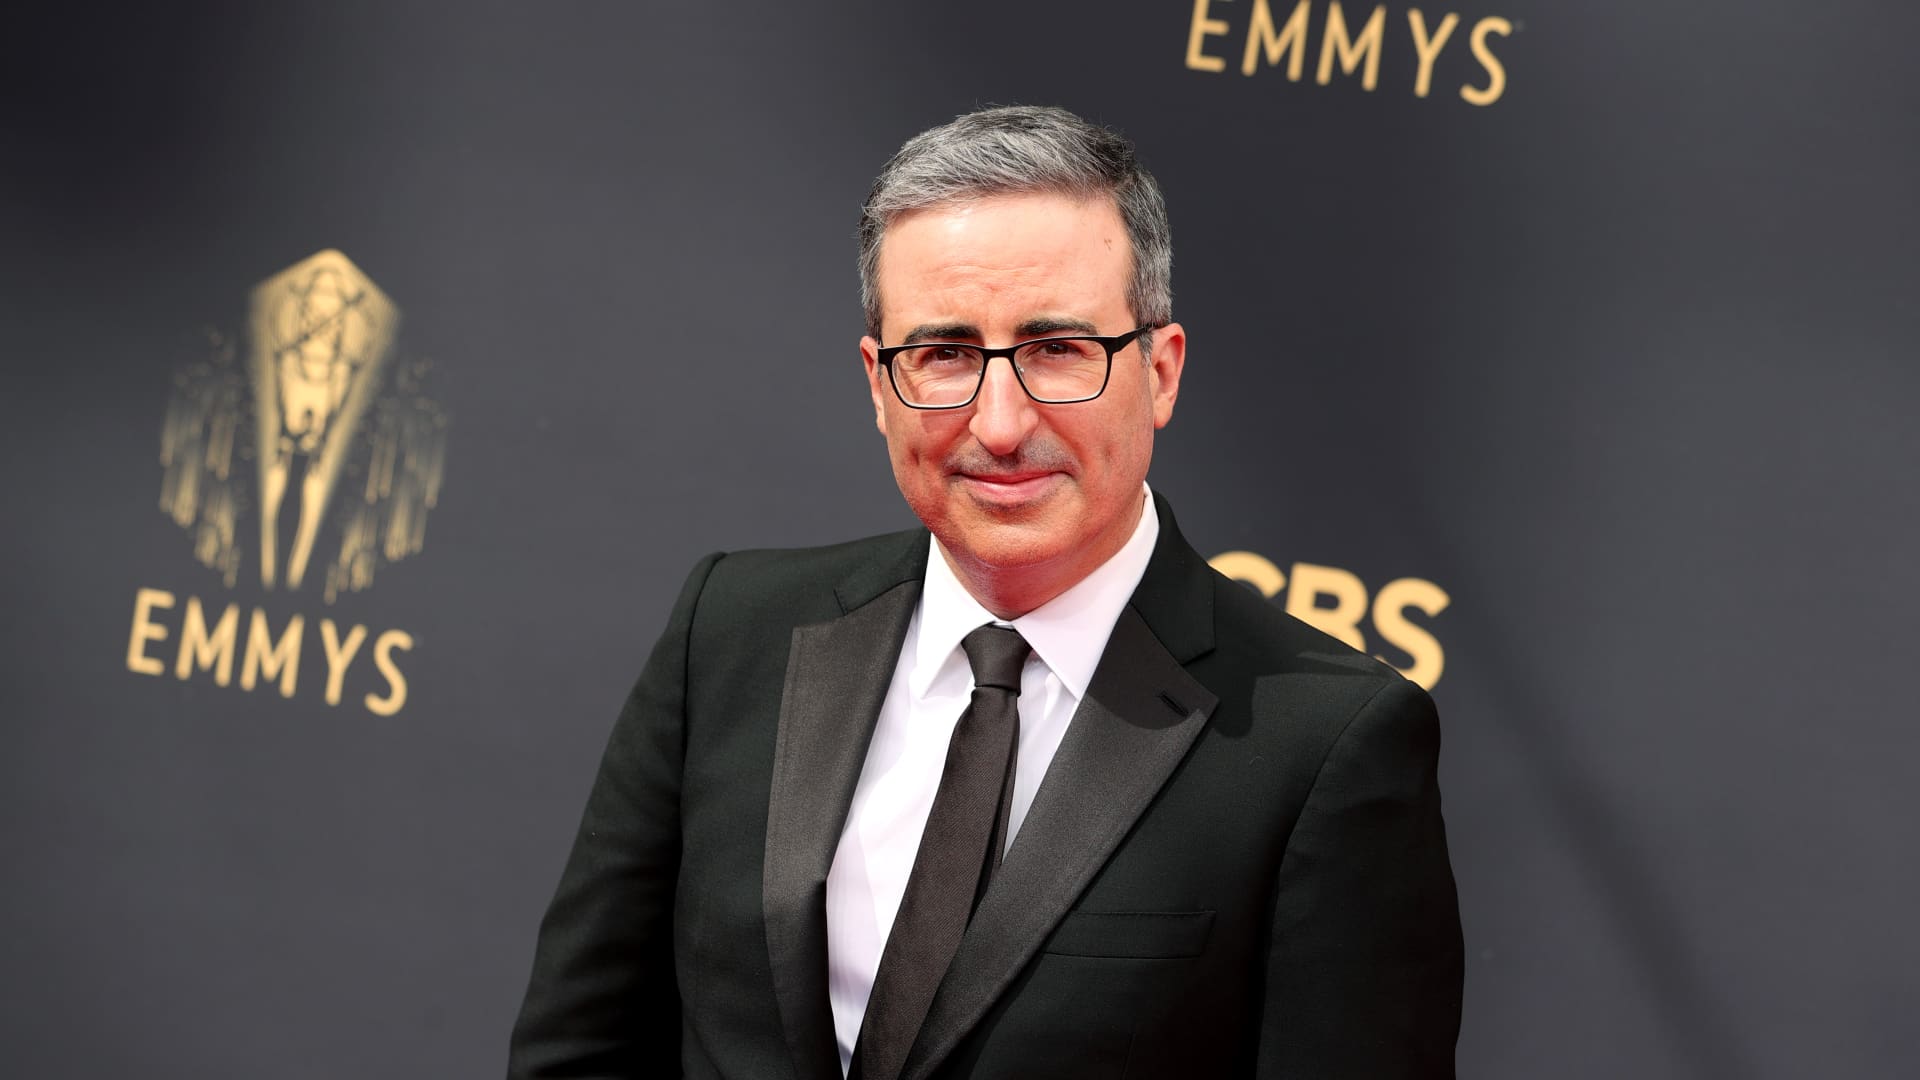 John Oliver attends the 73rd Primetime Emmy Awards at L.A. LIVE on September 19, 2021 in Los Angeles, California.